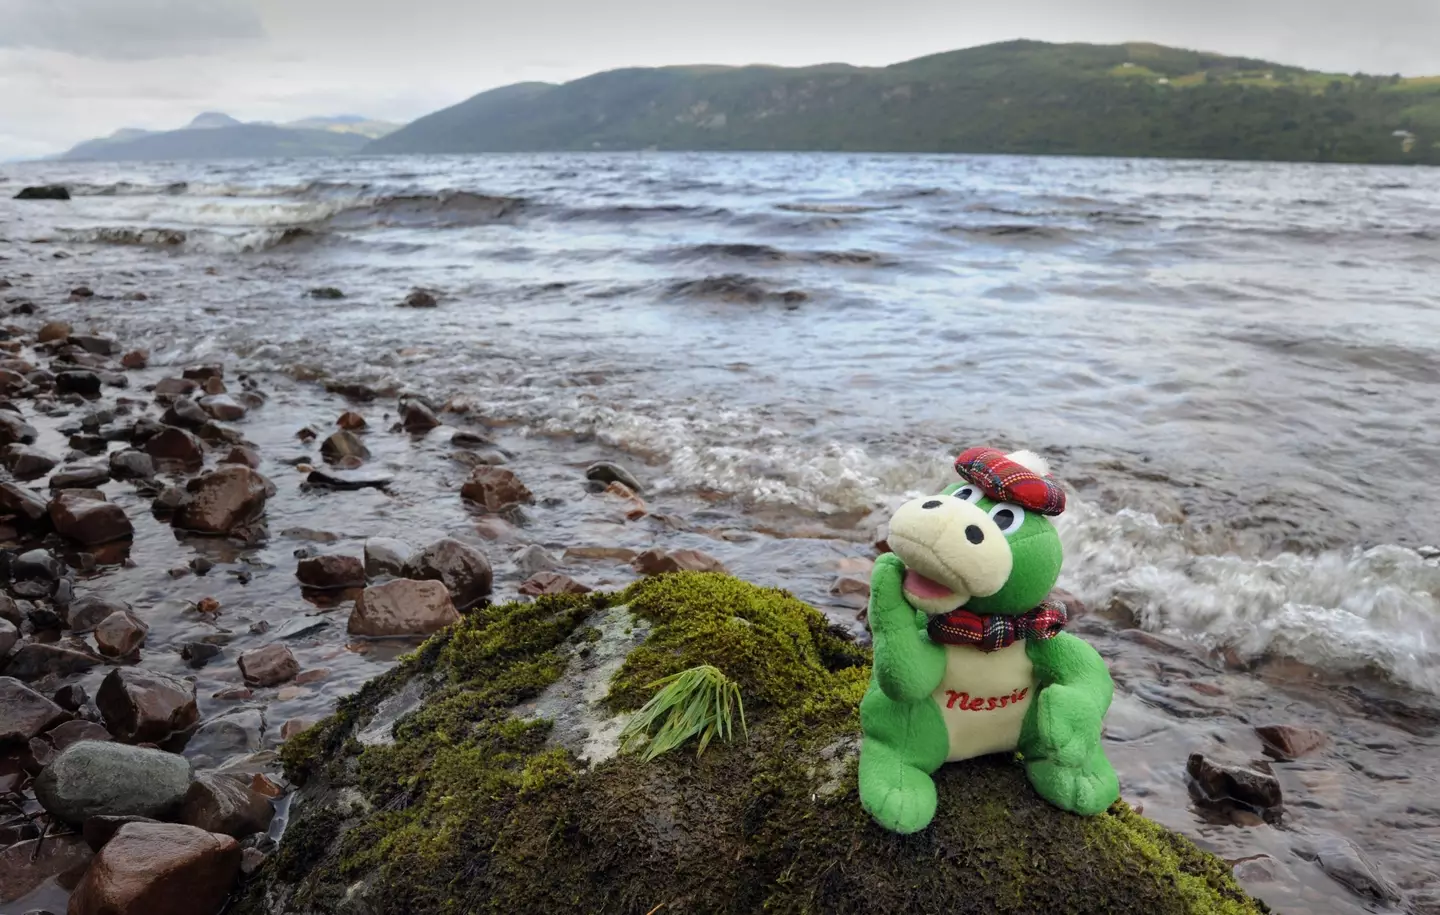 A very clear sighting of Nessie here.